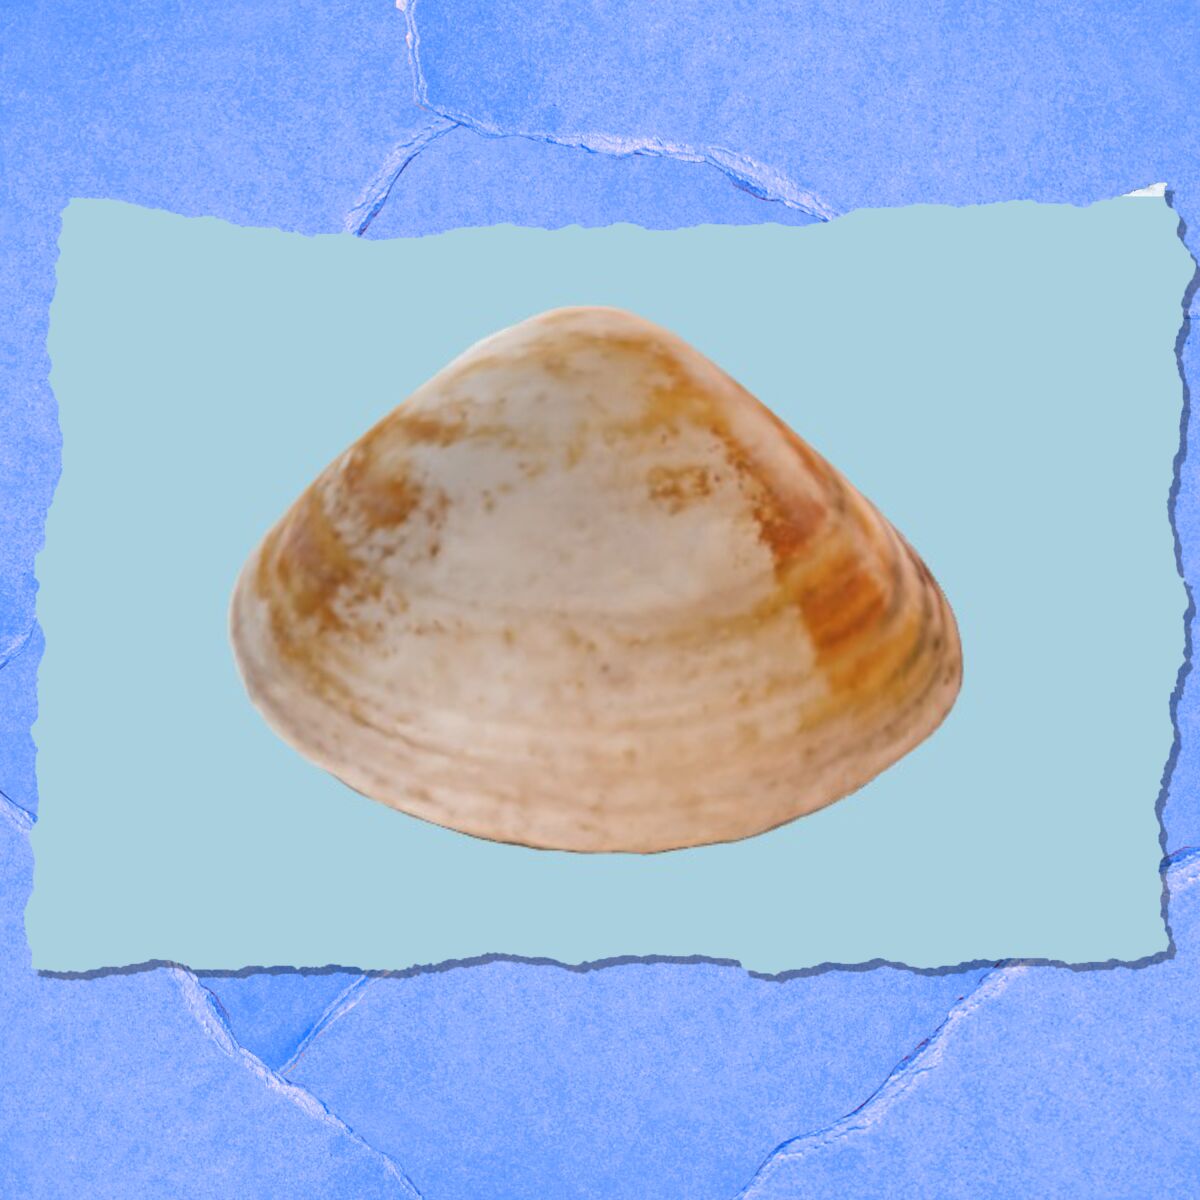 An illustration of a clam.